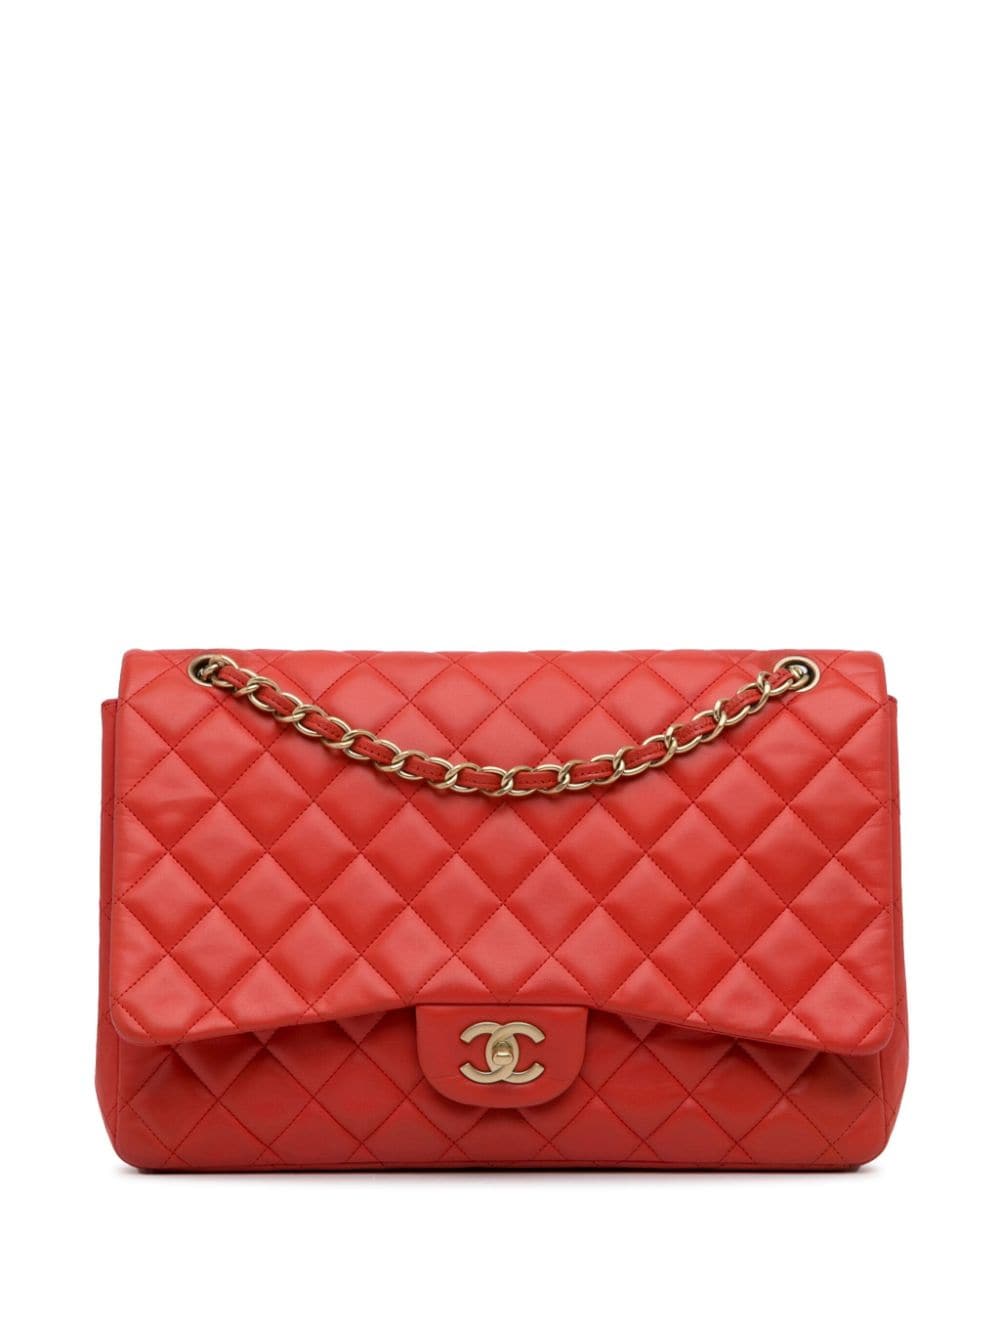 Pre-owned Chanel 2009-2010 Maxi Classic Flap Shoulder Bag In Orange